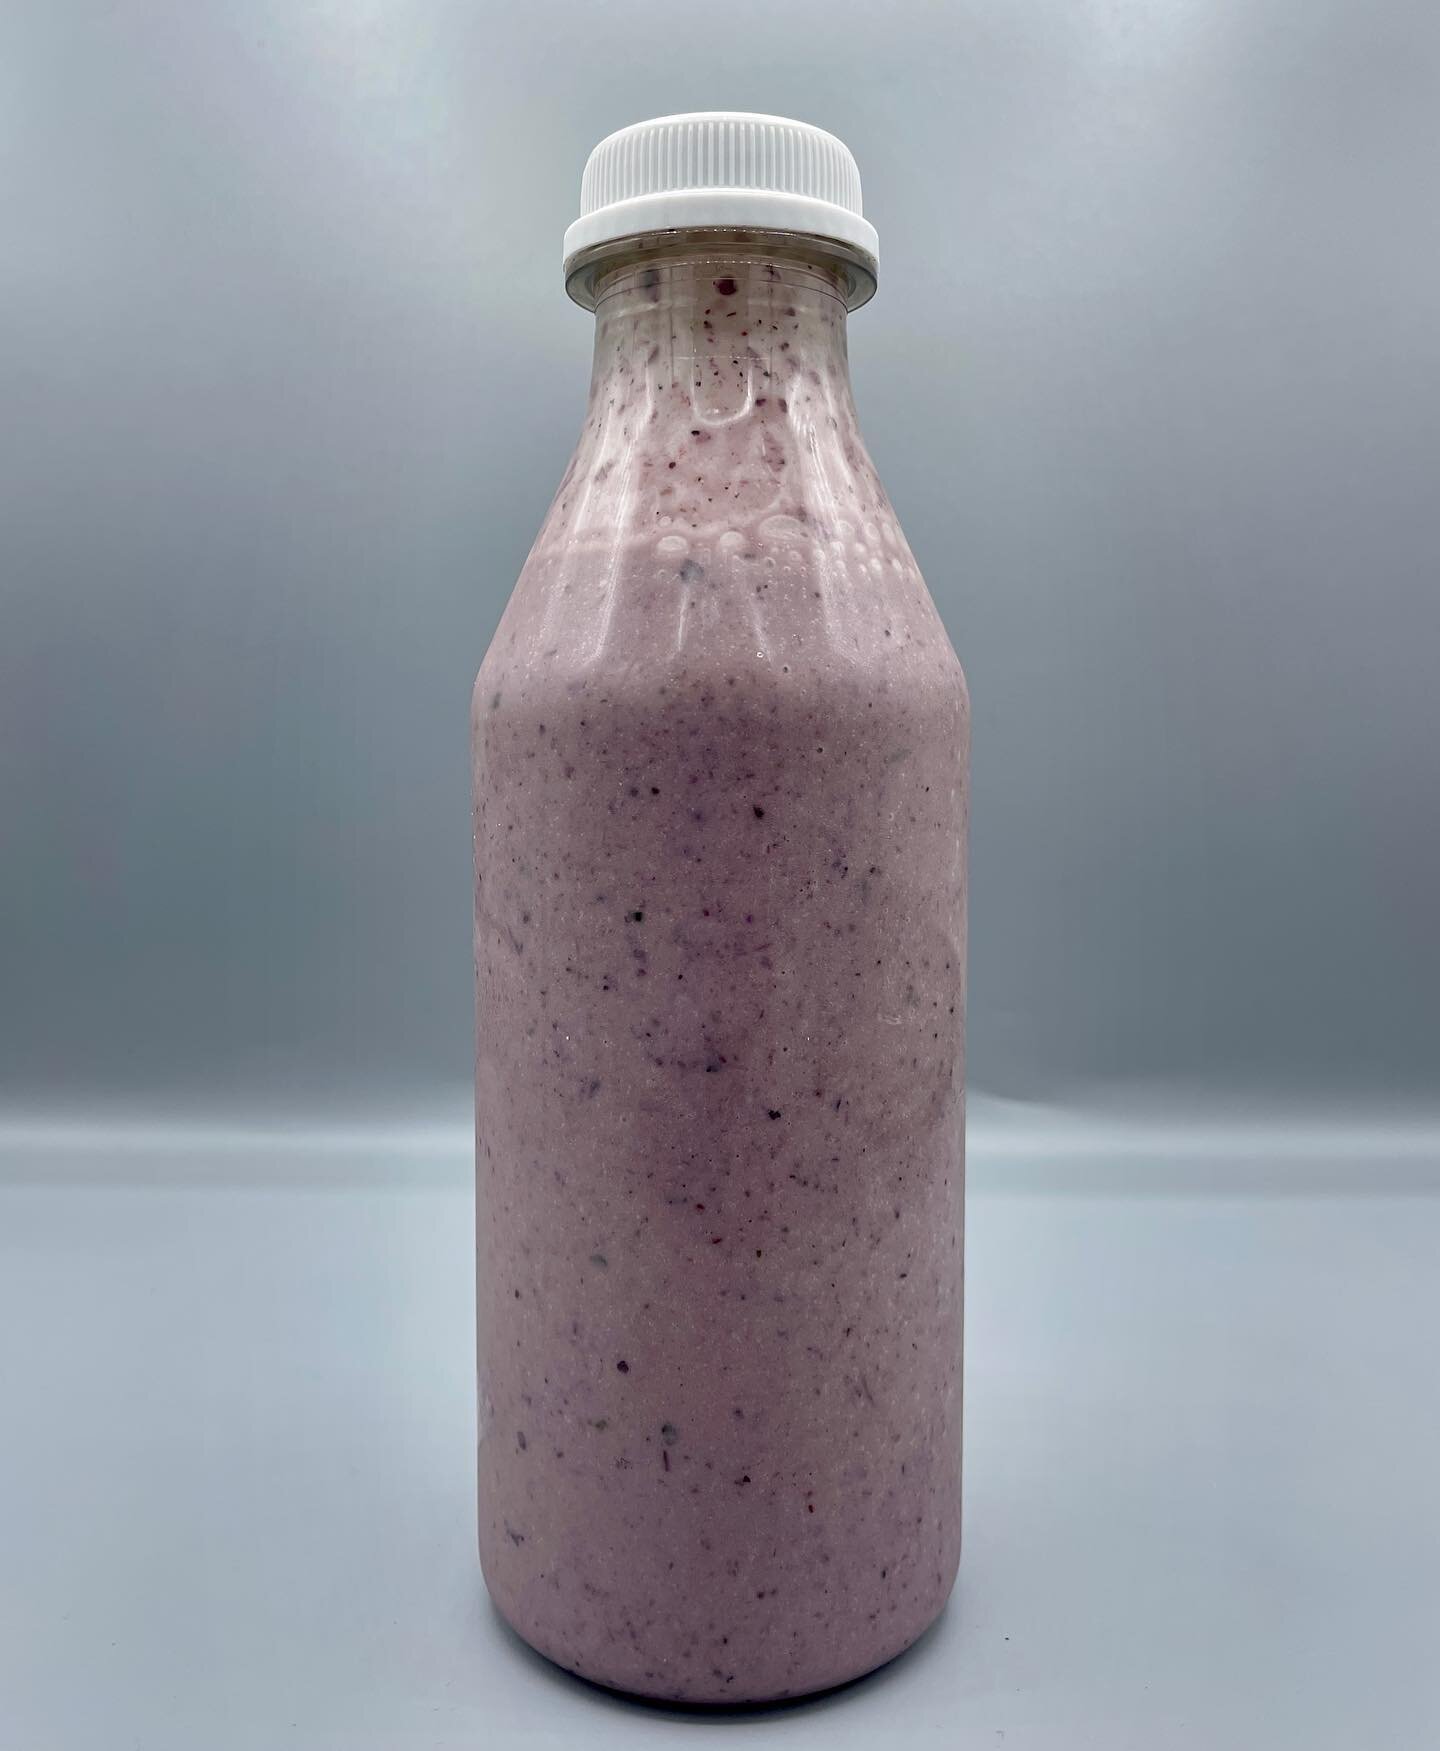 Mixed Berry smoothie 🥤 
Mixed winter berries, oats, almond milk 😋
|
|
|
|
|
|
|
|

#smoothie #healthyfood #healthy #vegan #healthylifestyle #smoothiebowl #food #smoothies #breakfast #foodie #plantbased #fruit #smoothierecipes #foodporn #fitness #he